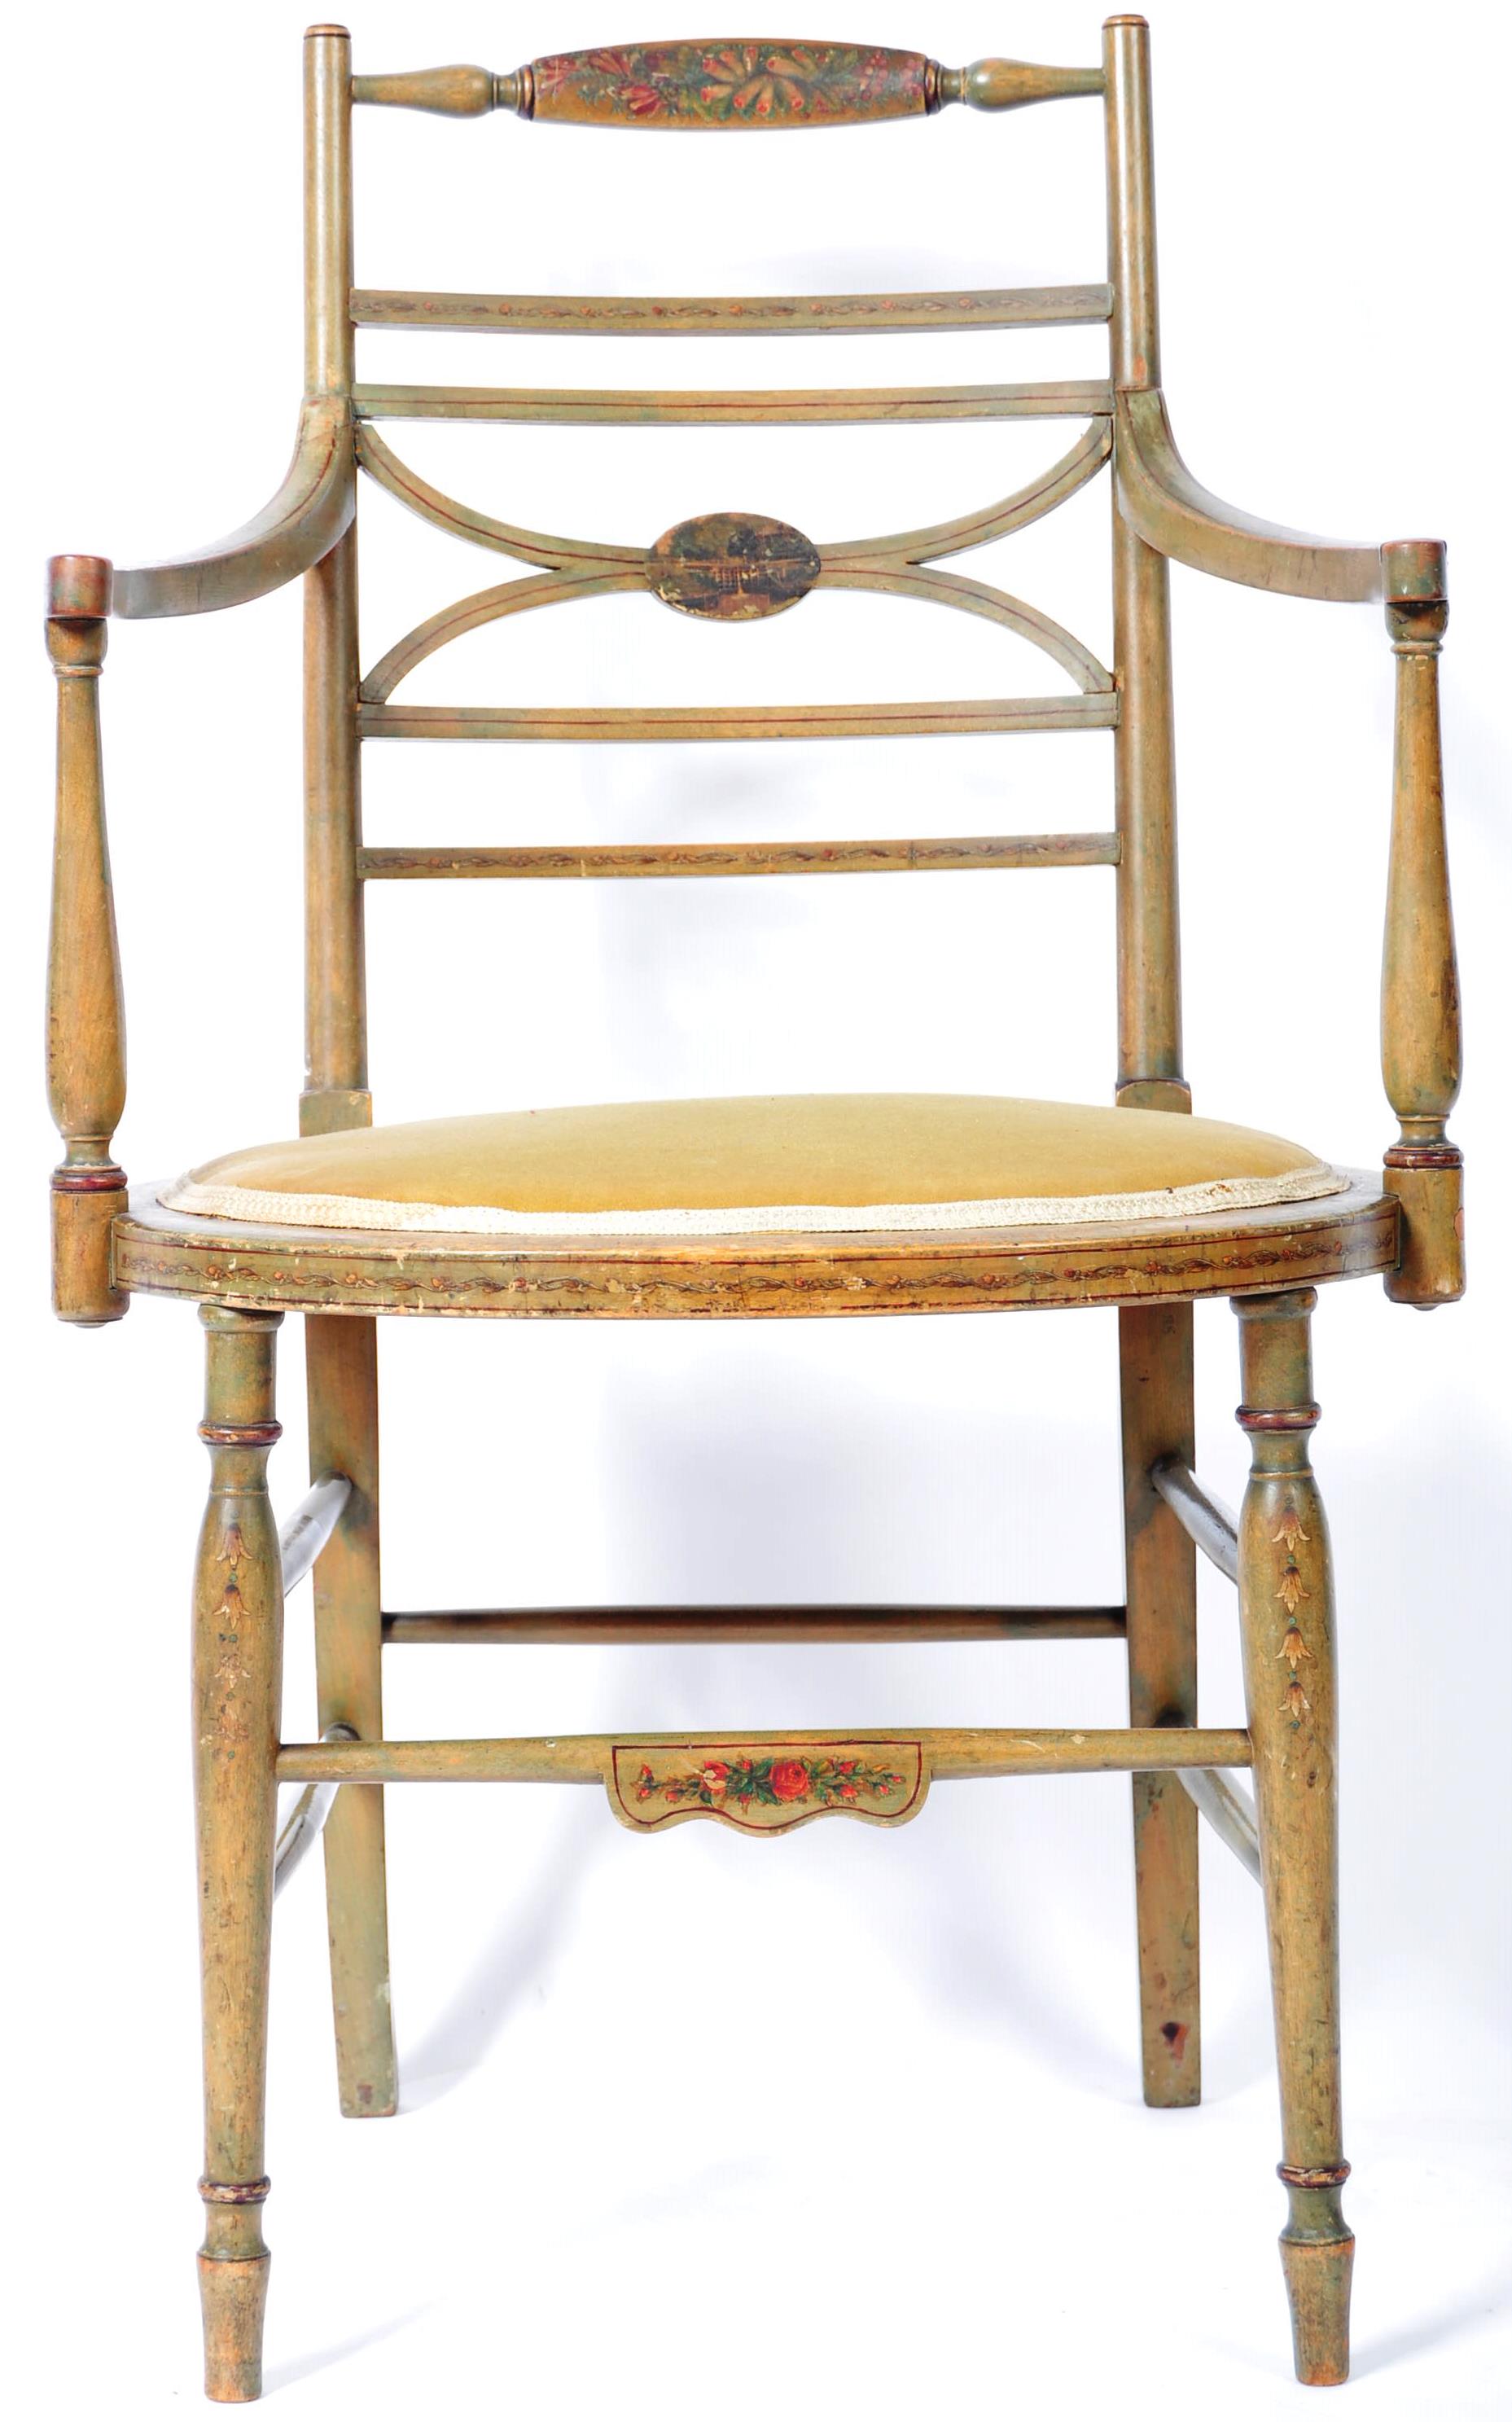 EARLY 19TH CENTURY GEORGIAN REGENCY PAINTED ARM CHAIR - Image 3 of 8